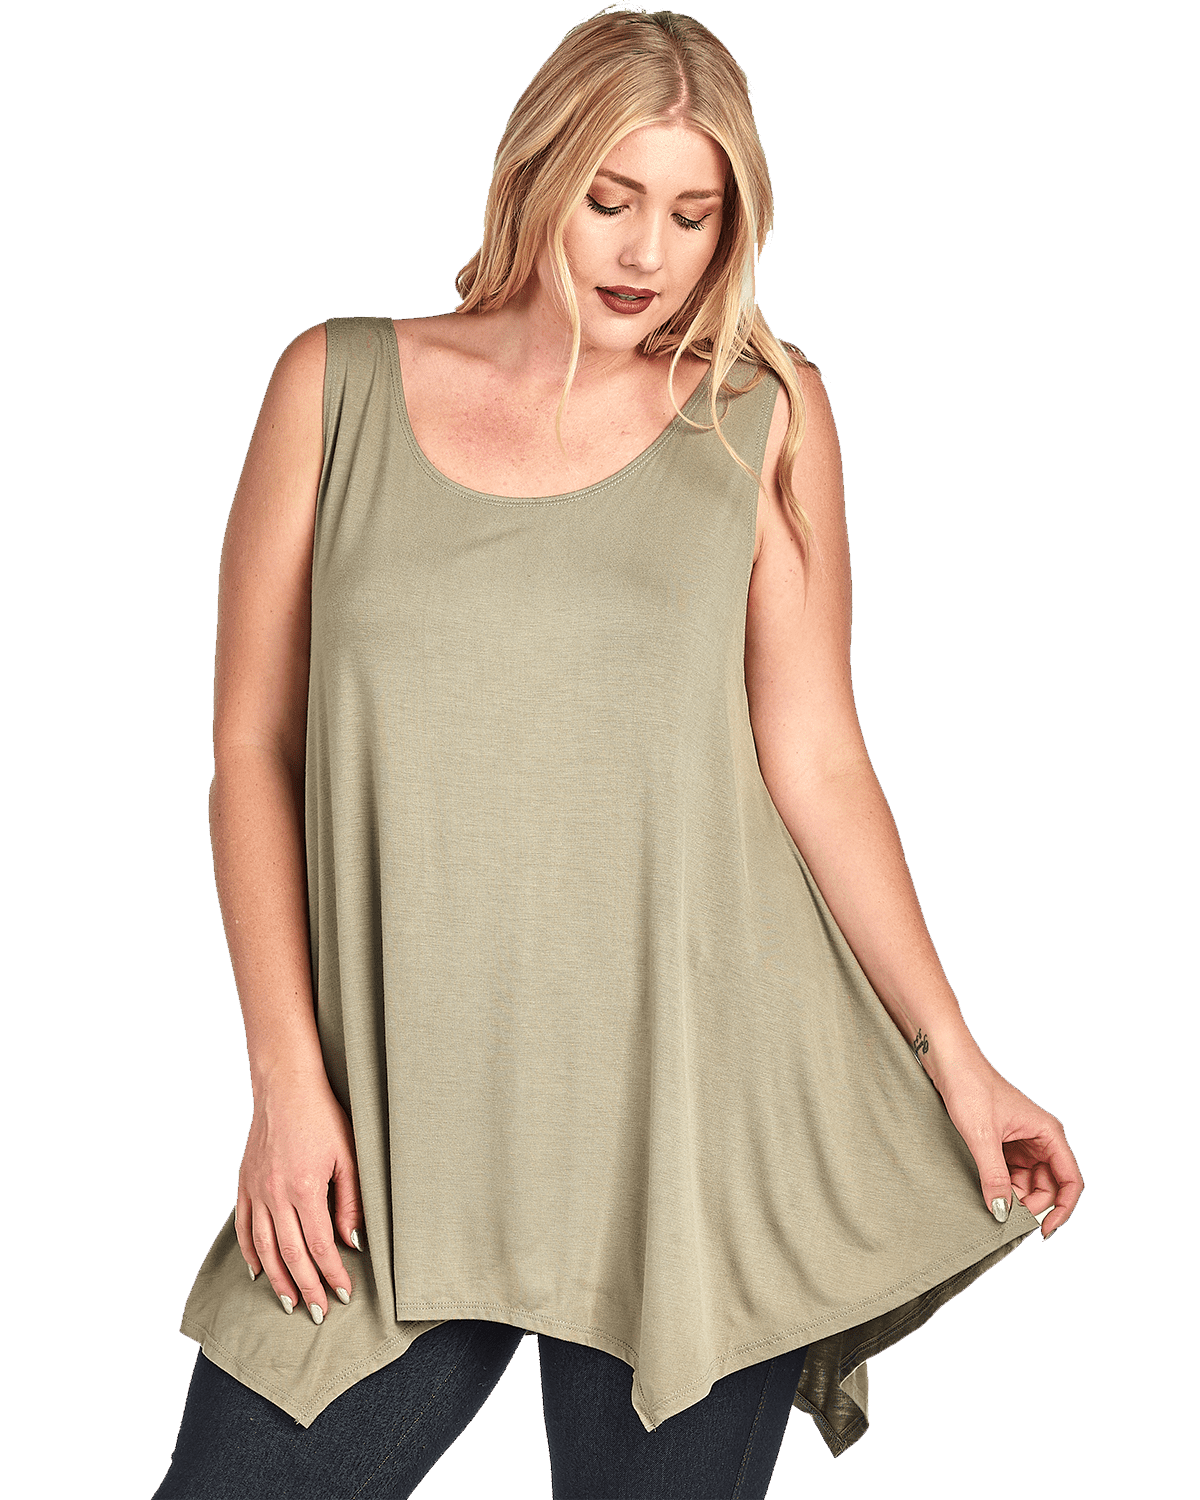 Sharon's Outlet - Plus Size Curvy Womens Casual High Low Tank Top MADE ...